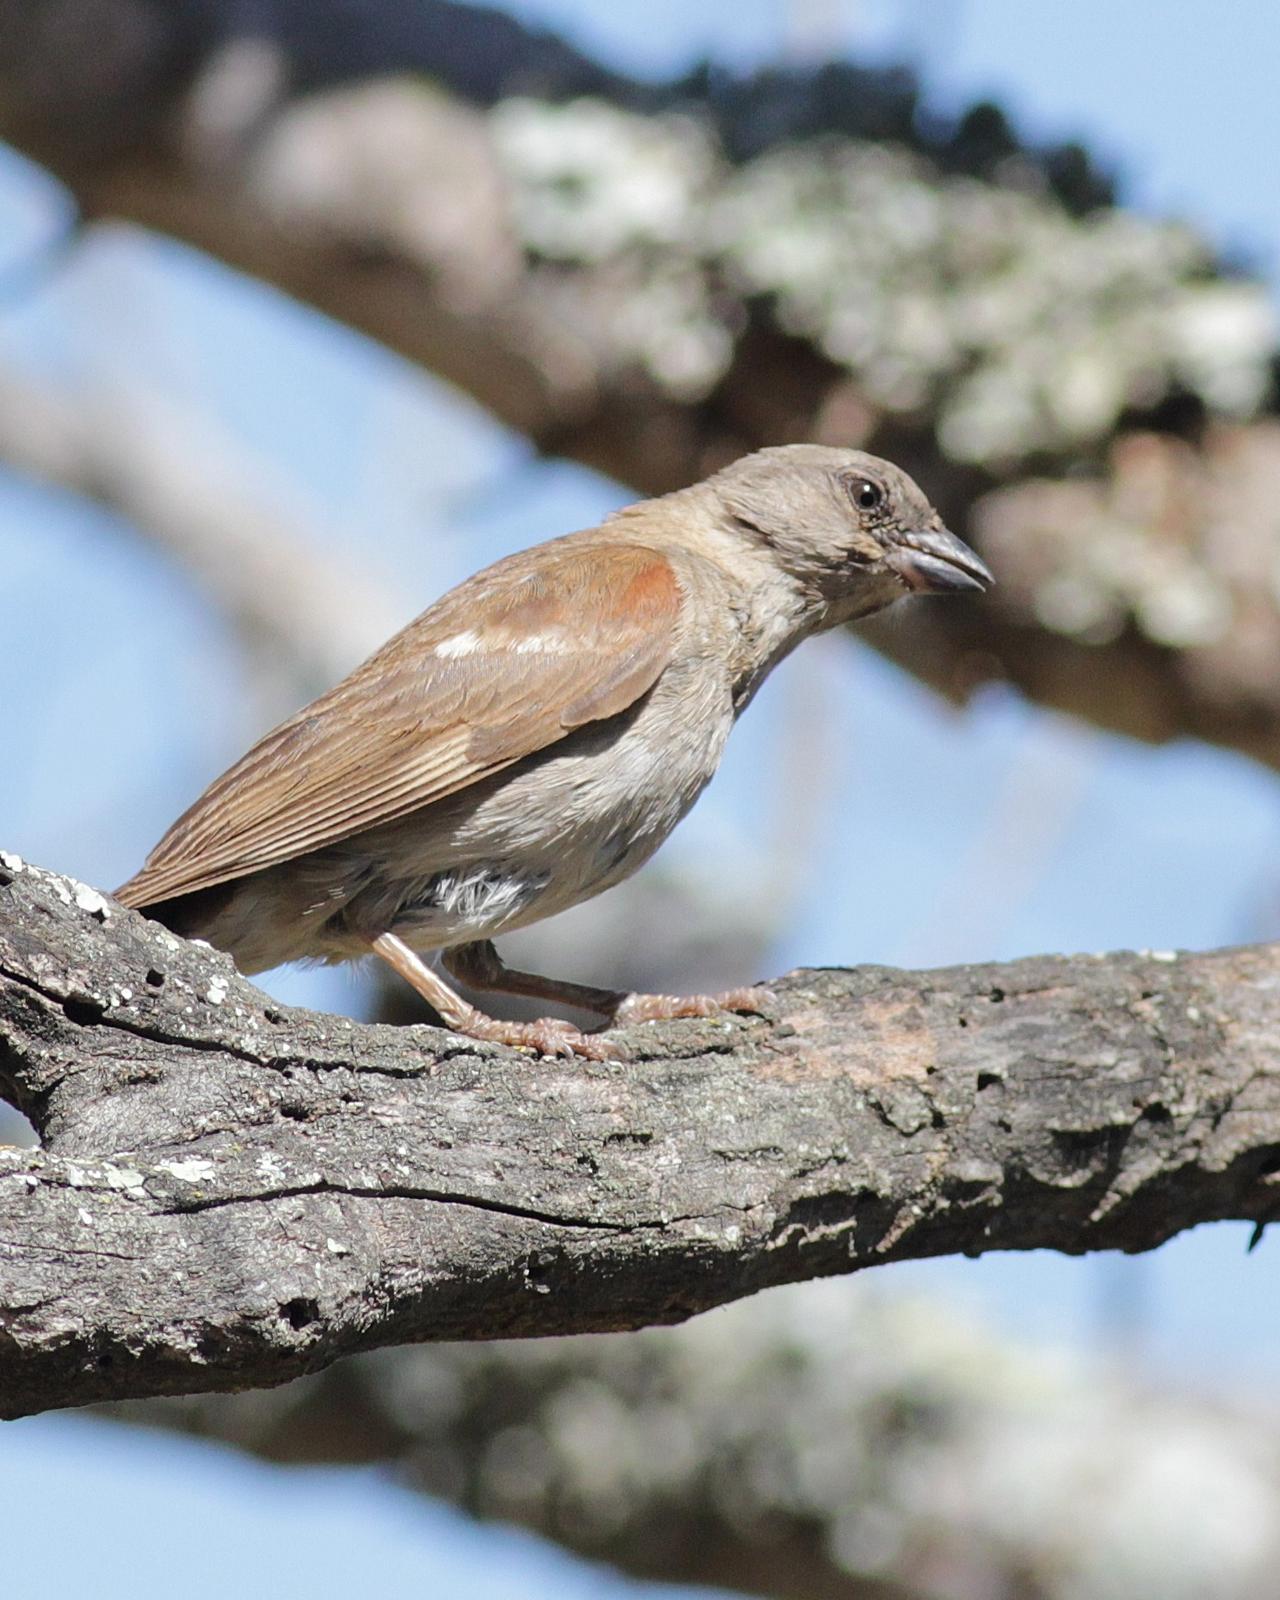 Southern Gray-headed Sparrow Photo by Alex Lamoreaux